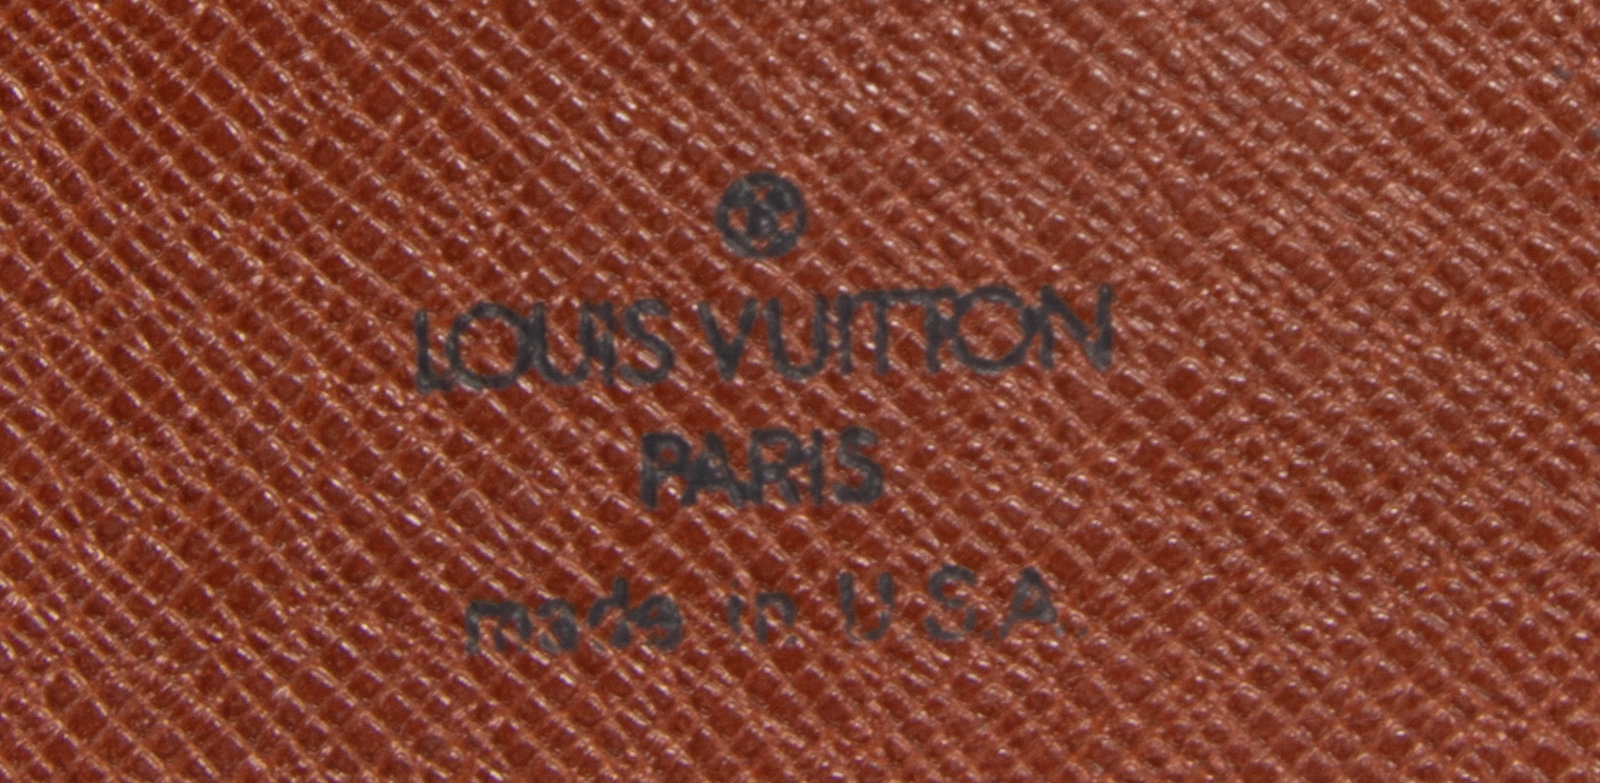 Sold at Auction: Louis Vuitton Monogram Leather Address Book